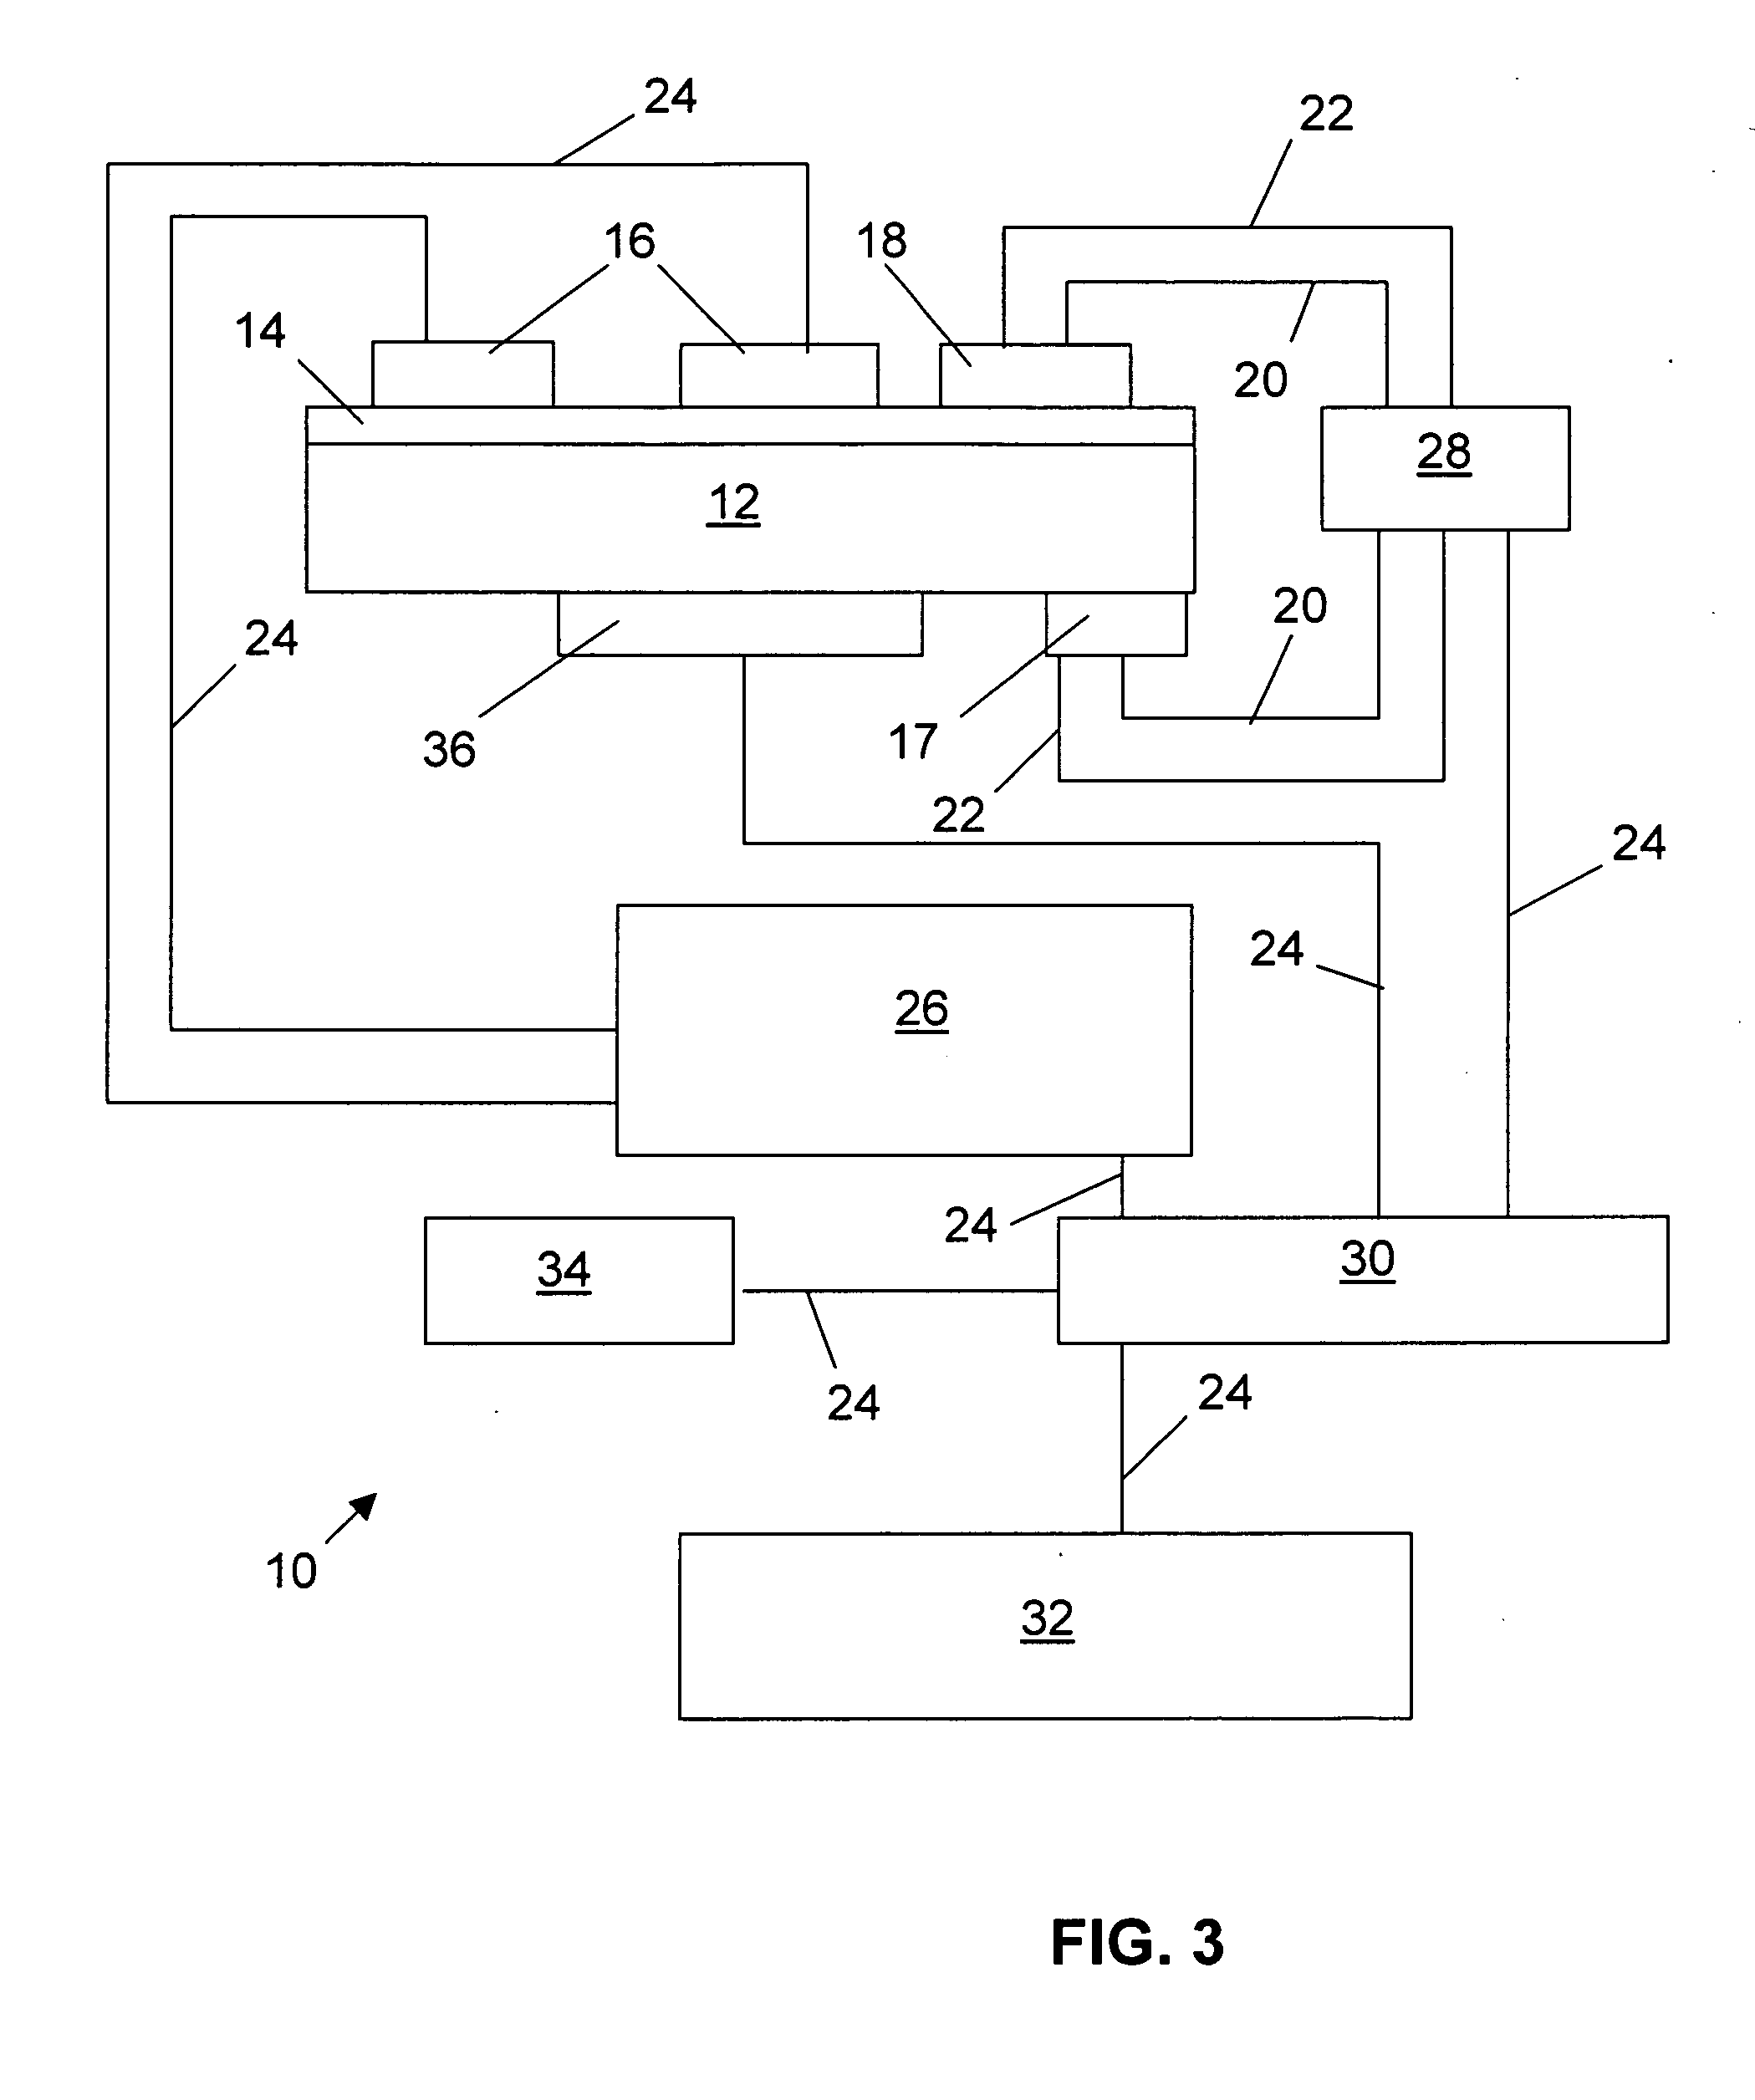 Methods and apparatus for controlling catalytic processes, including catalyst regeneration and soot elimination